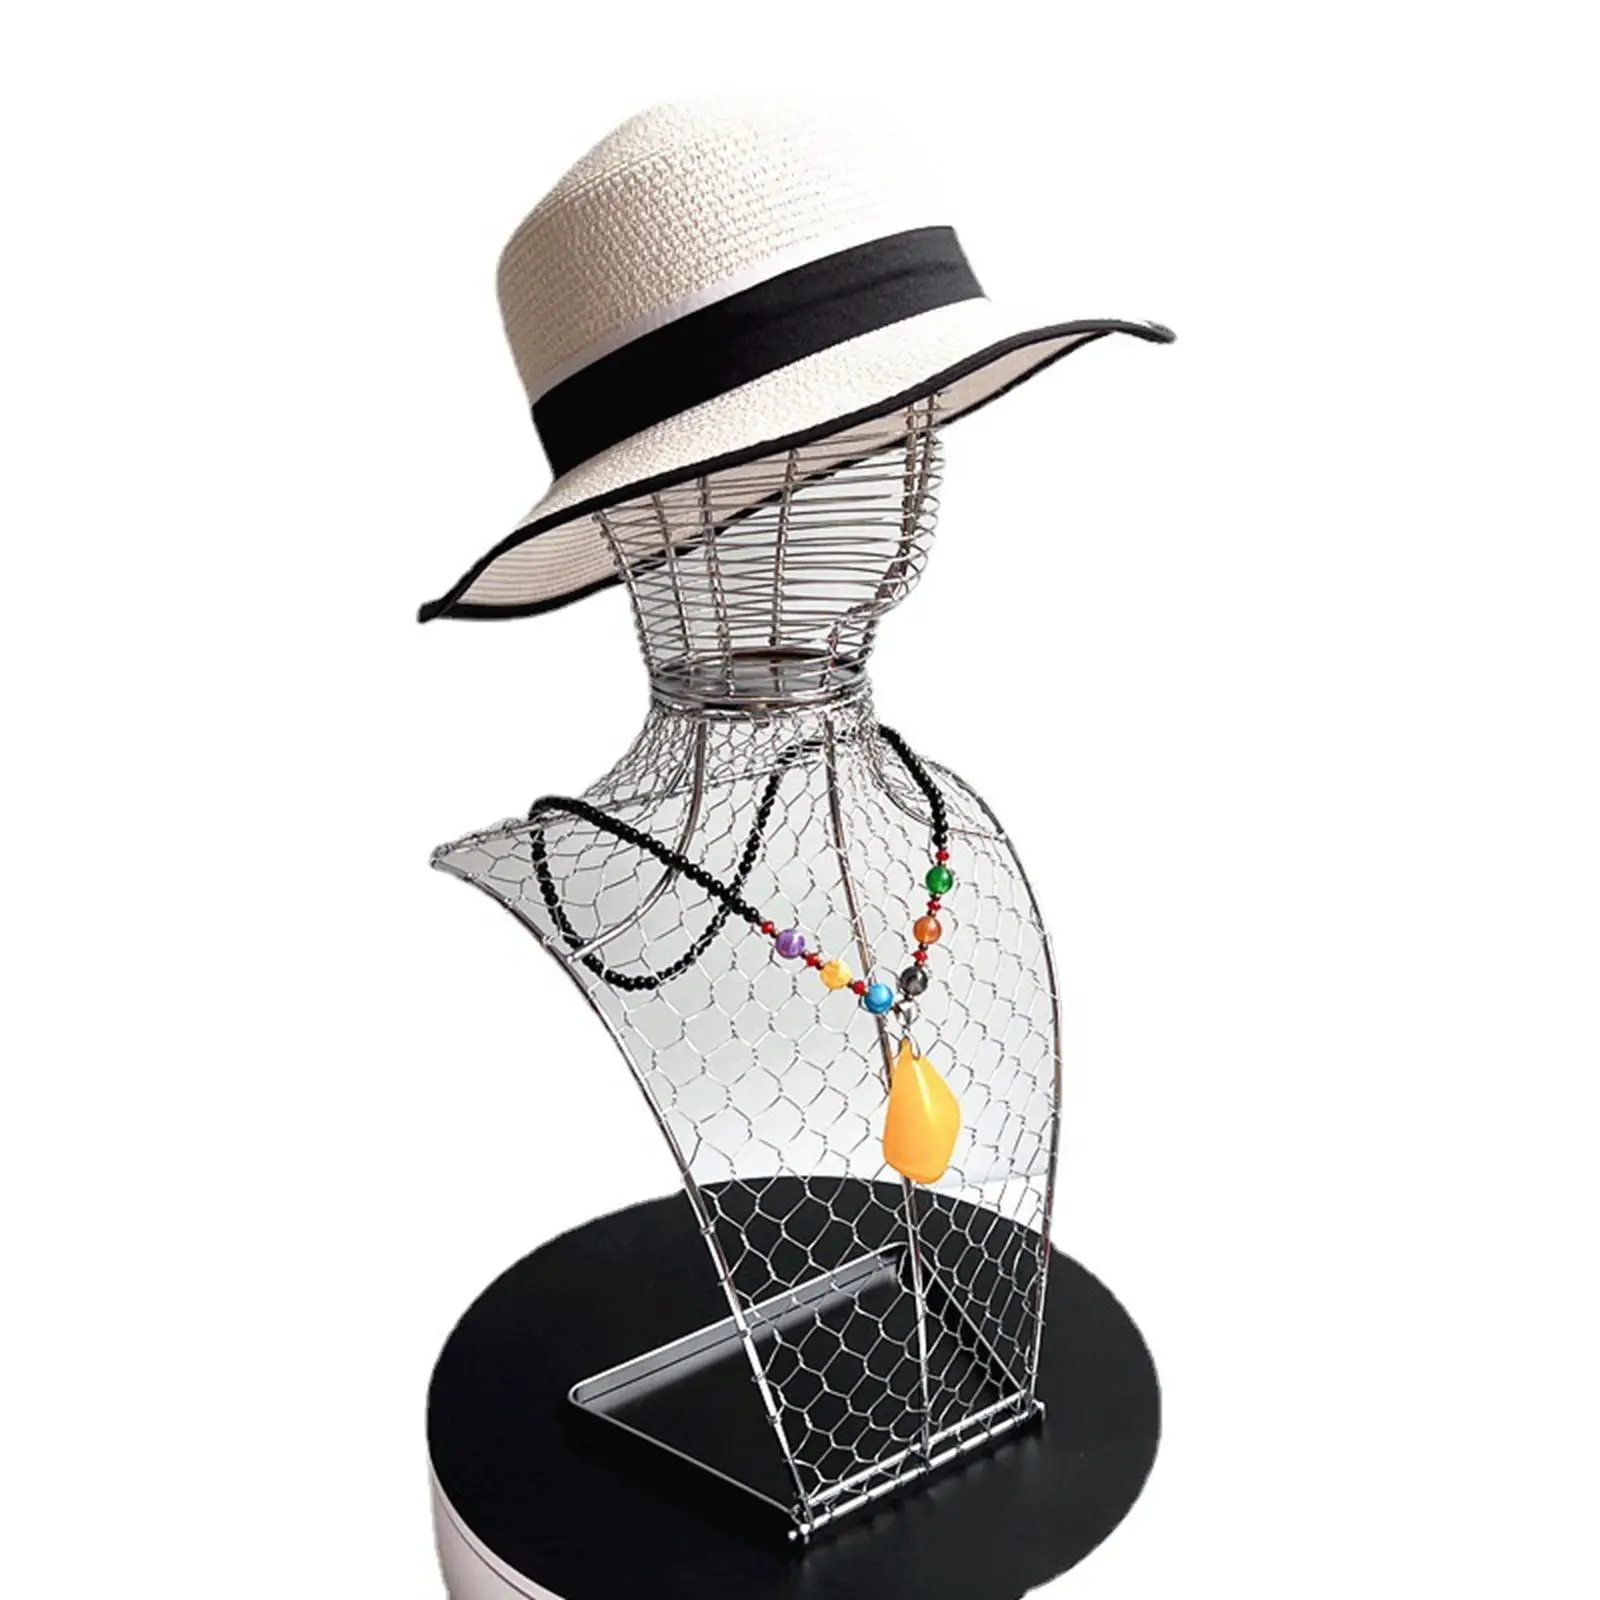 Necklace Display Stand Bust Sturdy 20.87inch Freestanding Jewelry Mannequin Bust Hat Holder Stand for Counter Showcase hats shop